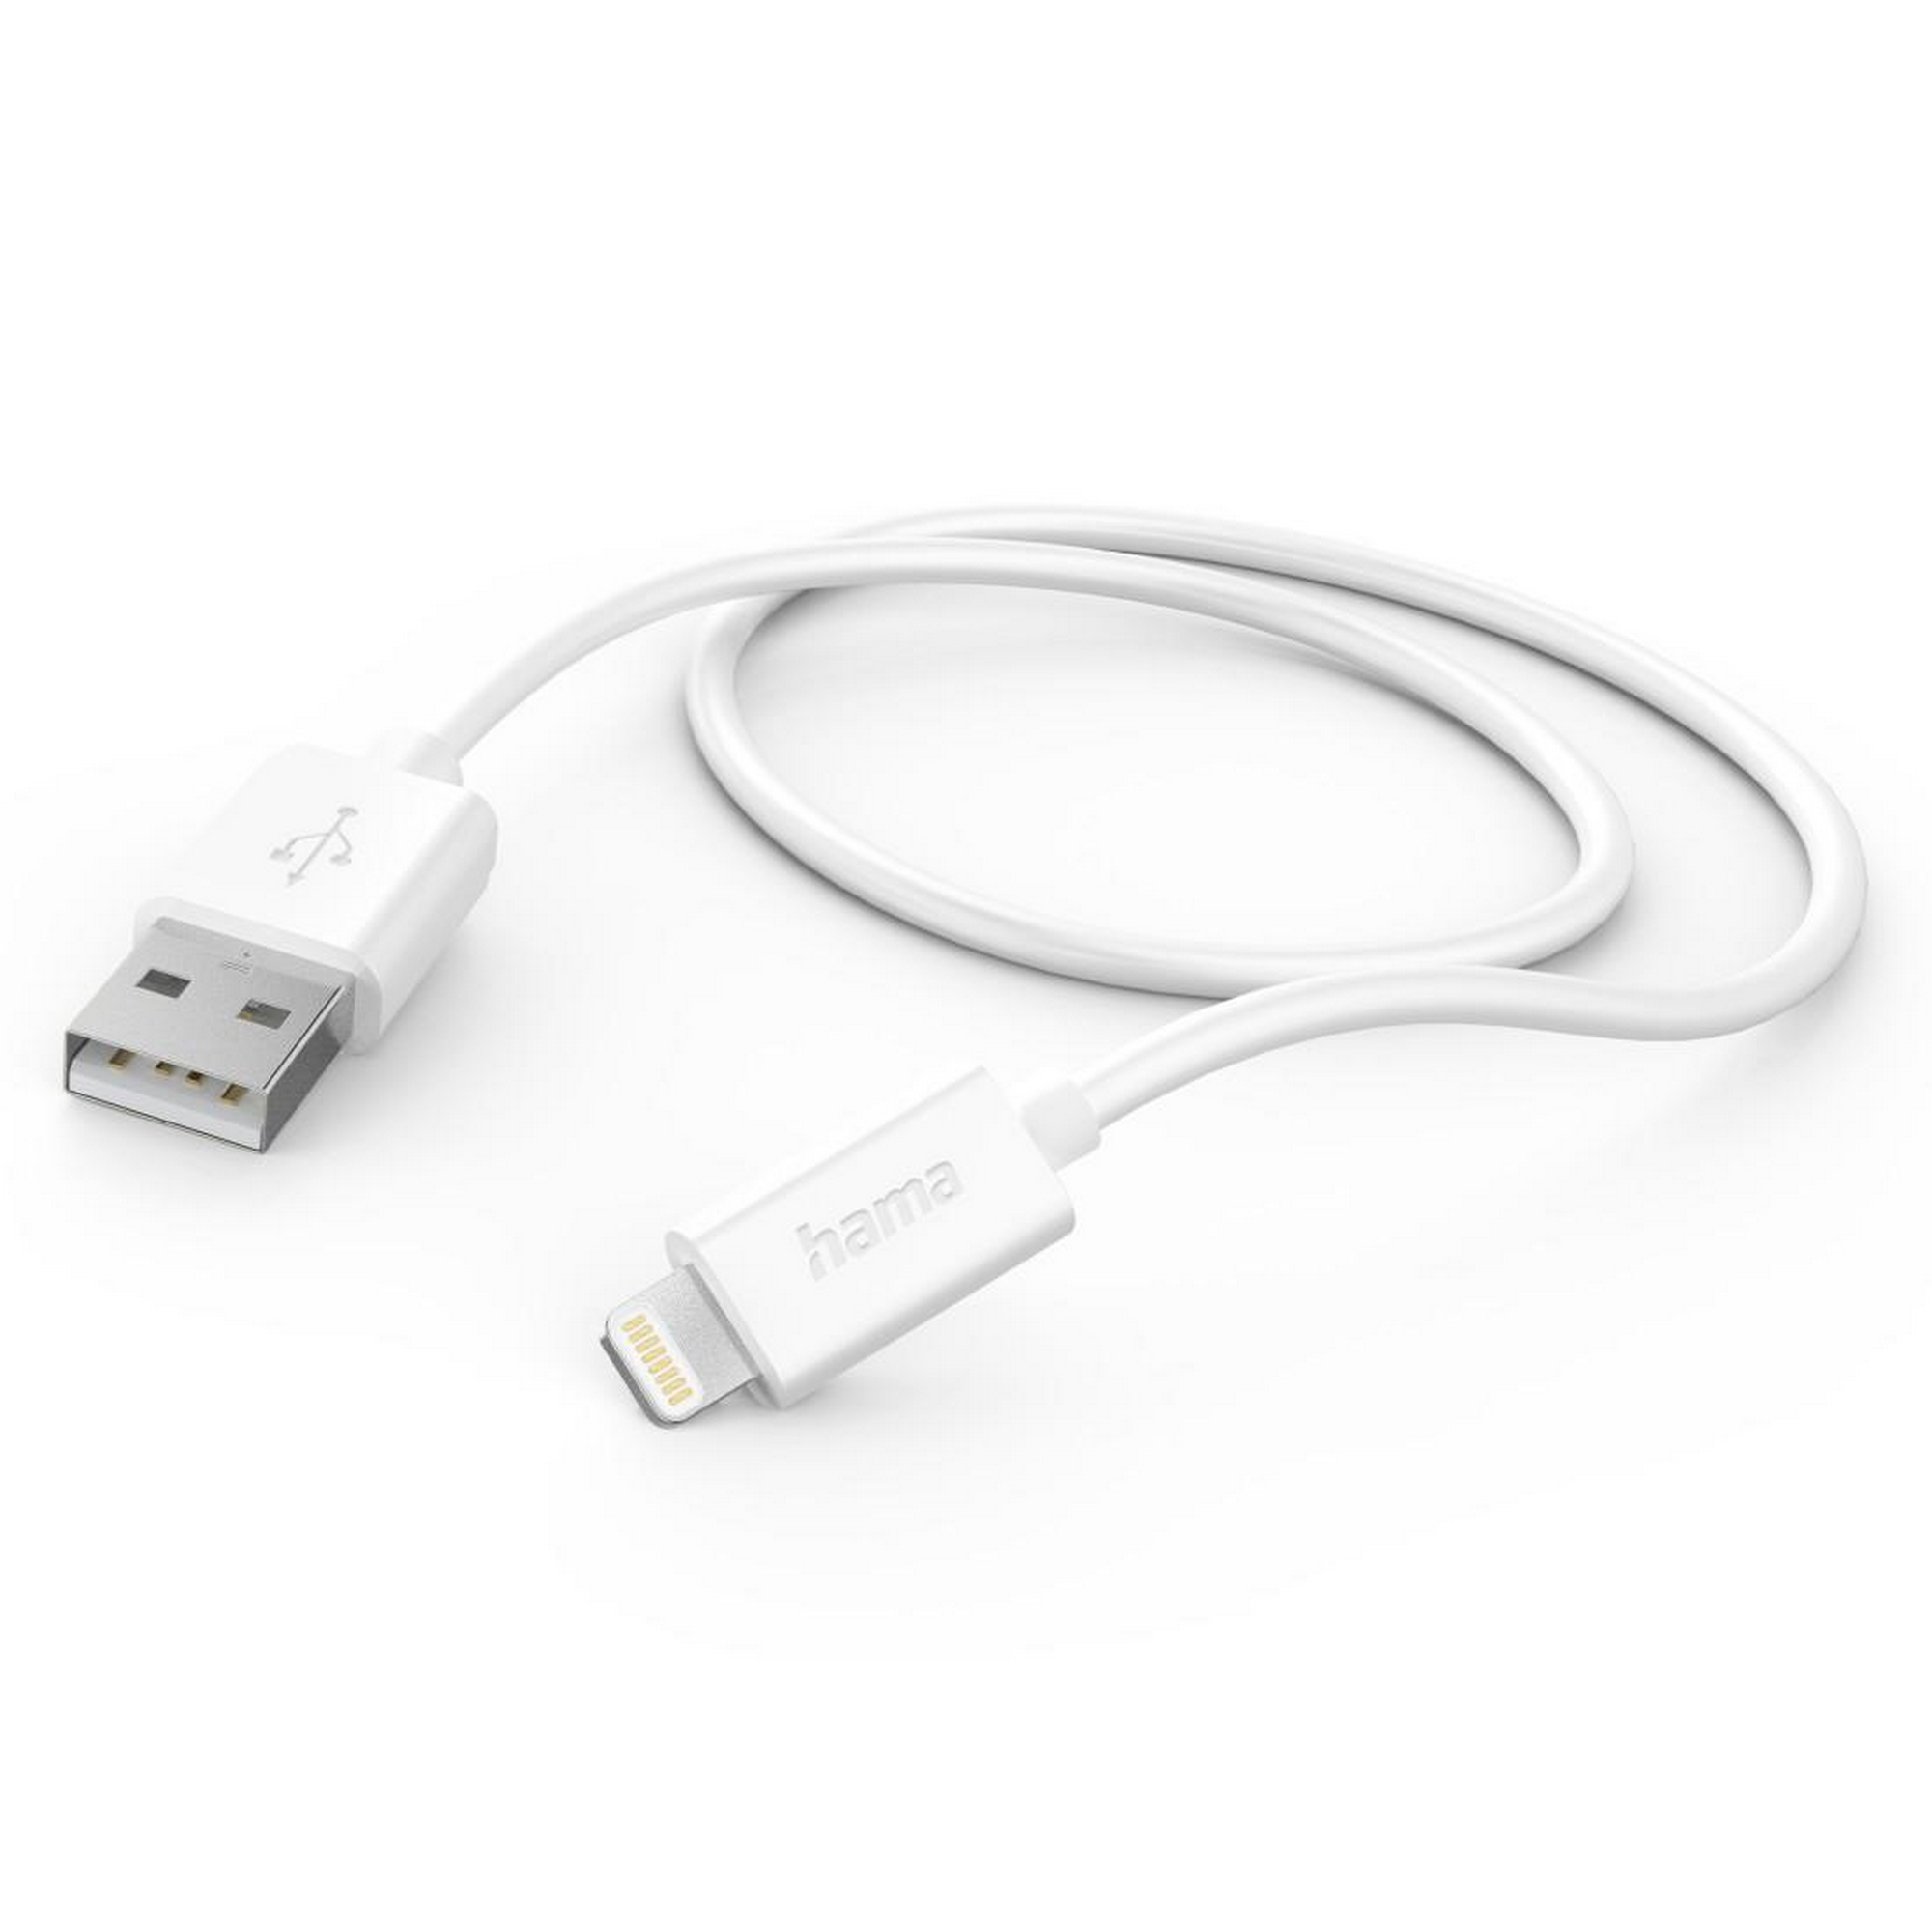 Ladekabel weiß USB-A mit Lightning 1 m + product picture